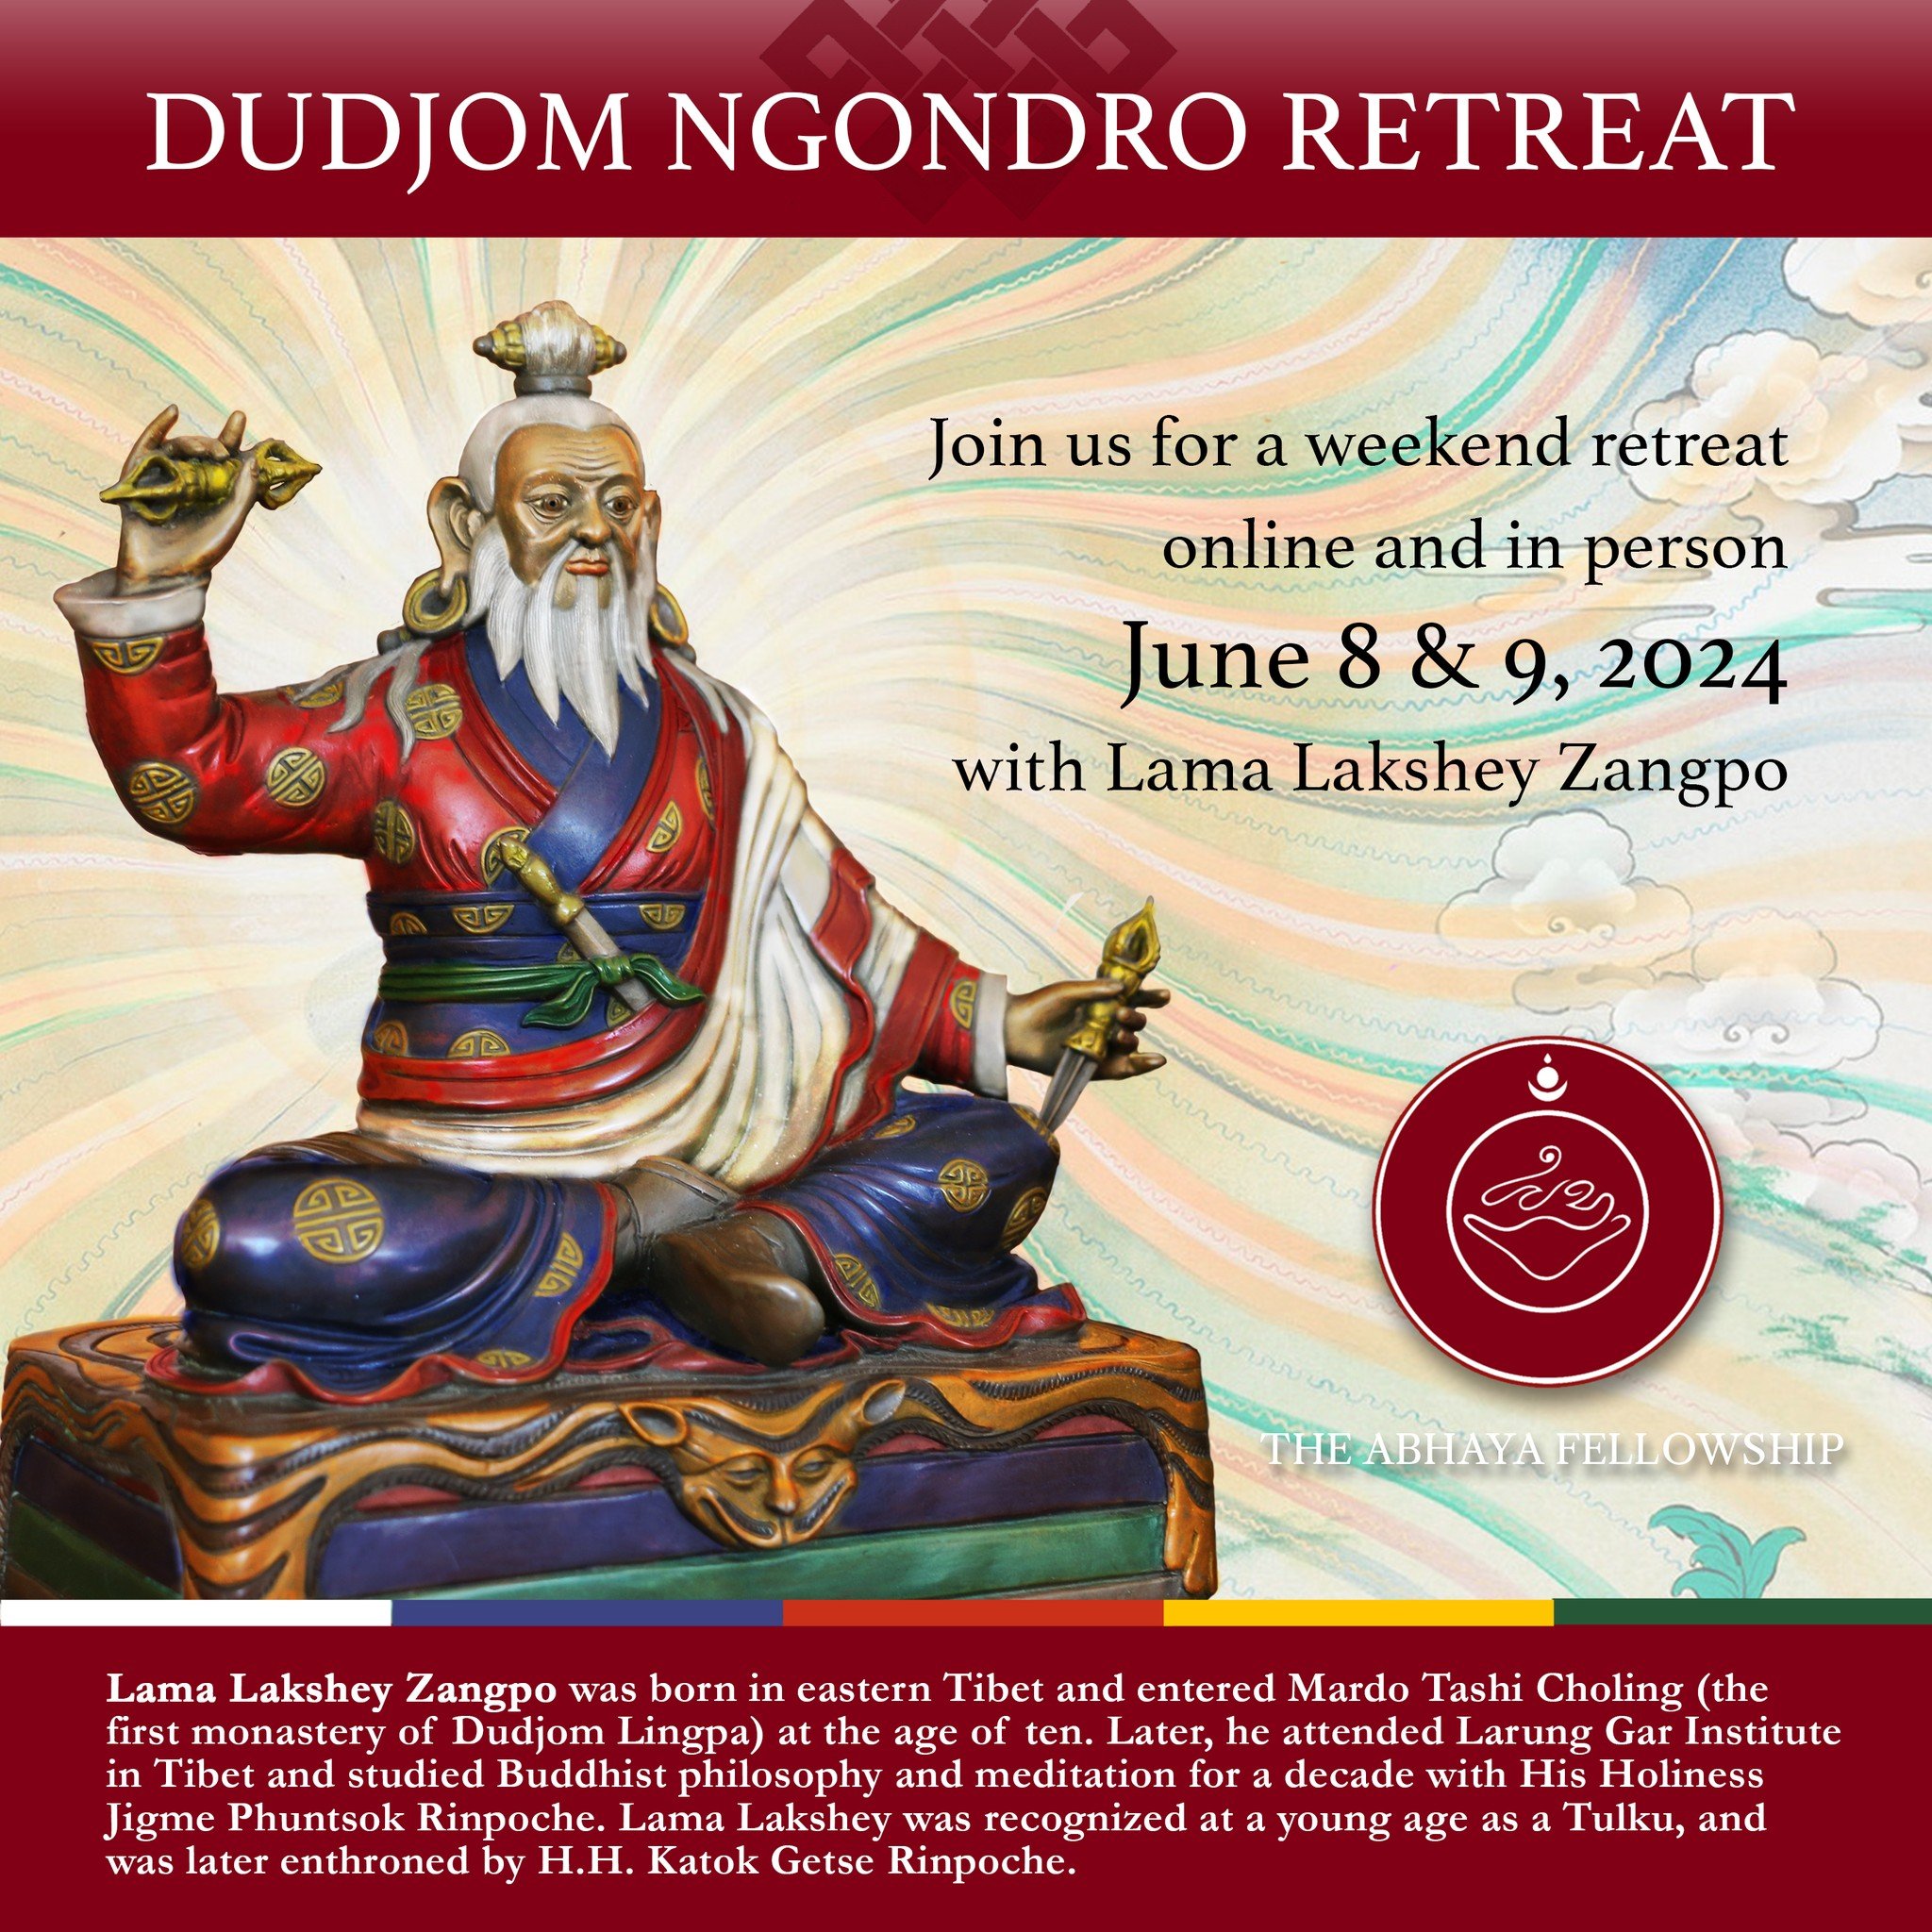 Register: https://events.humanitix.com/dudjom-ngondro-retreat-2024

Dudjom Ngondro Retreat
with Lama Lakshey Zangpo Rinpoche

Weekend of June 8 and 9, 2024 
10 am to 4:30 pm Pacific Time (PDT) daily
Online or in person

Lama Lakshey Zangpo is known f